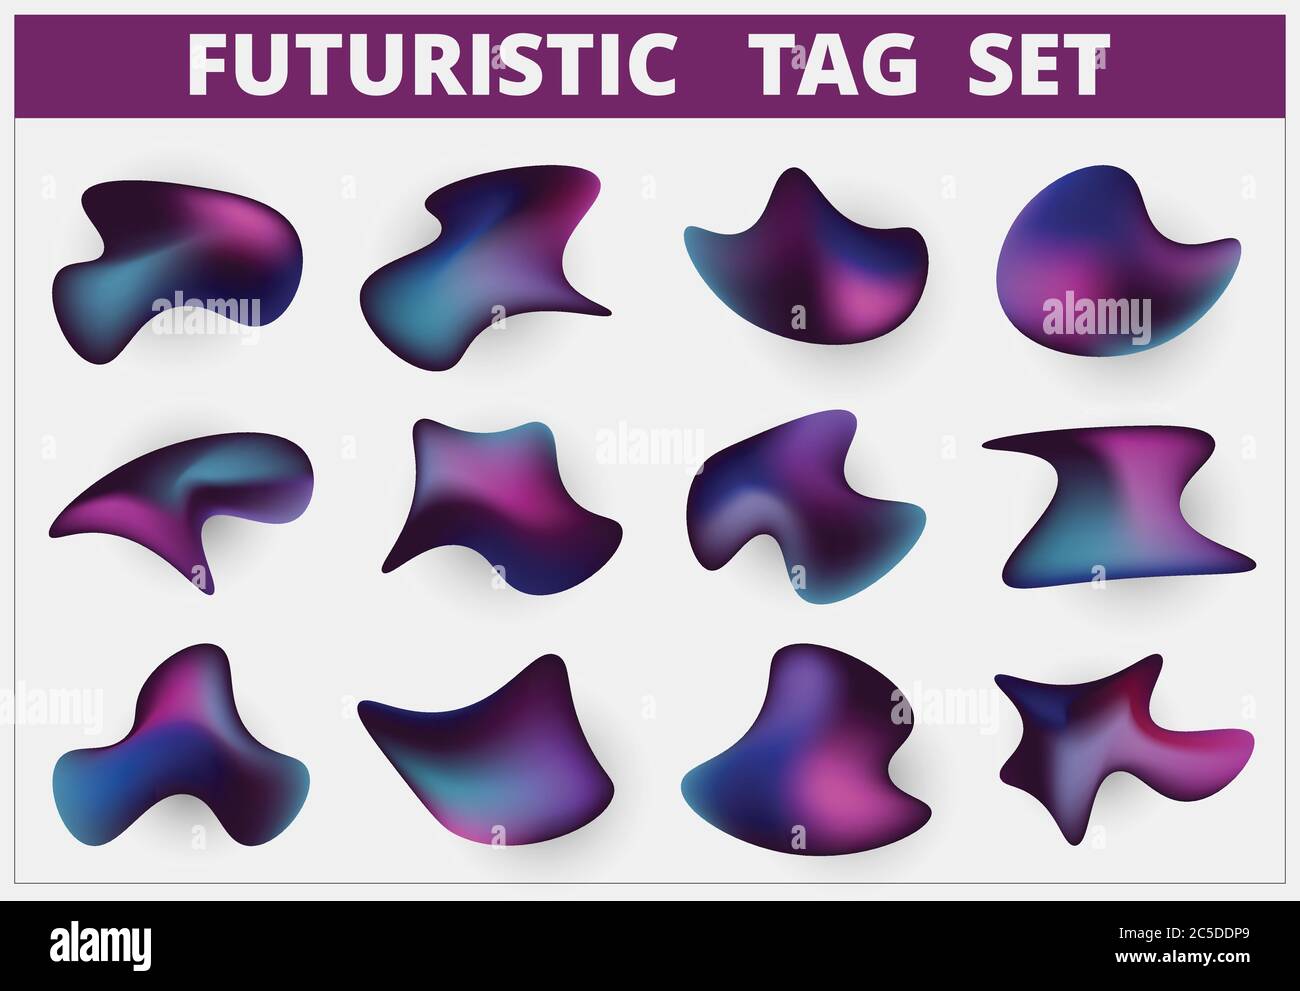 Abstract futuristic tag set of free shape design artwork. Decorate for ad, poster, artwork, template design, print. illustration vector eps10 Stock Vector